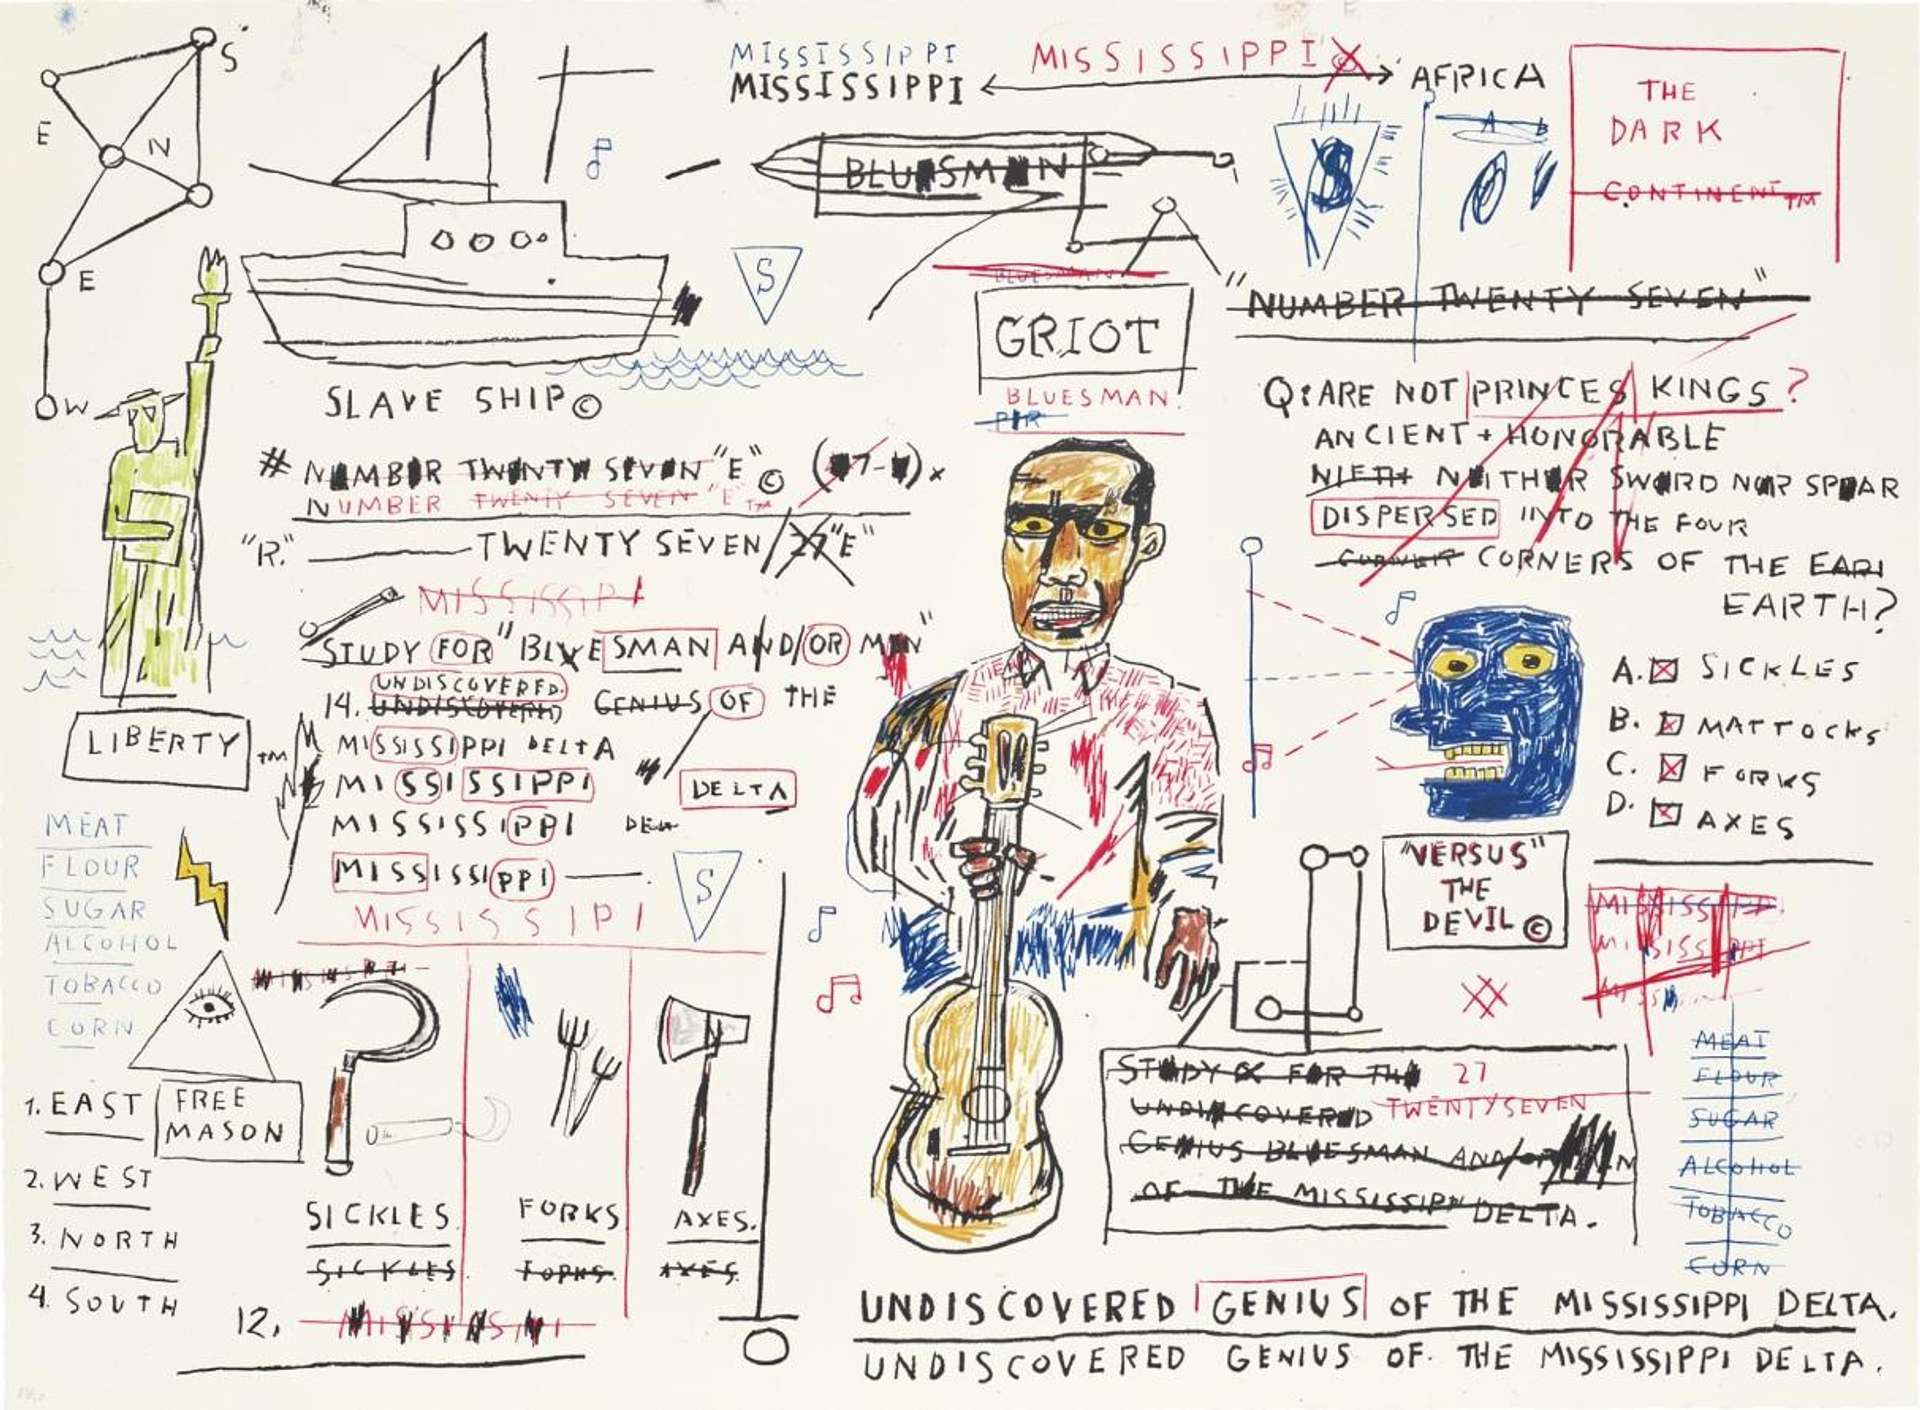 Sketches of a musician, historical landmarks and other texts